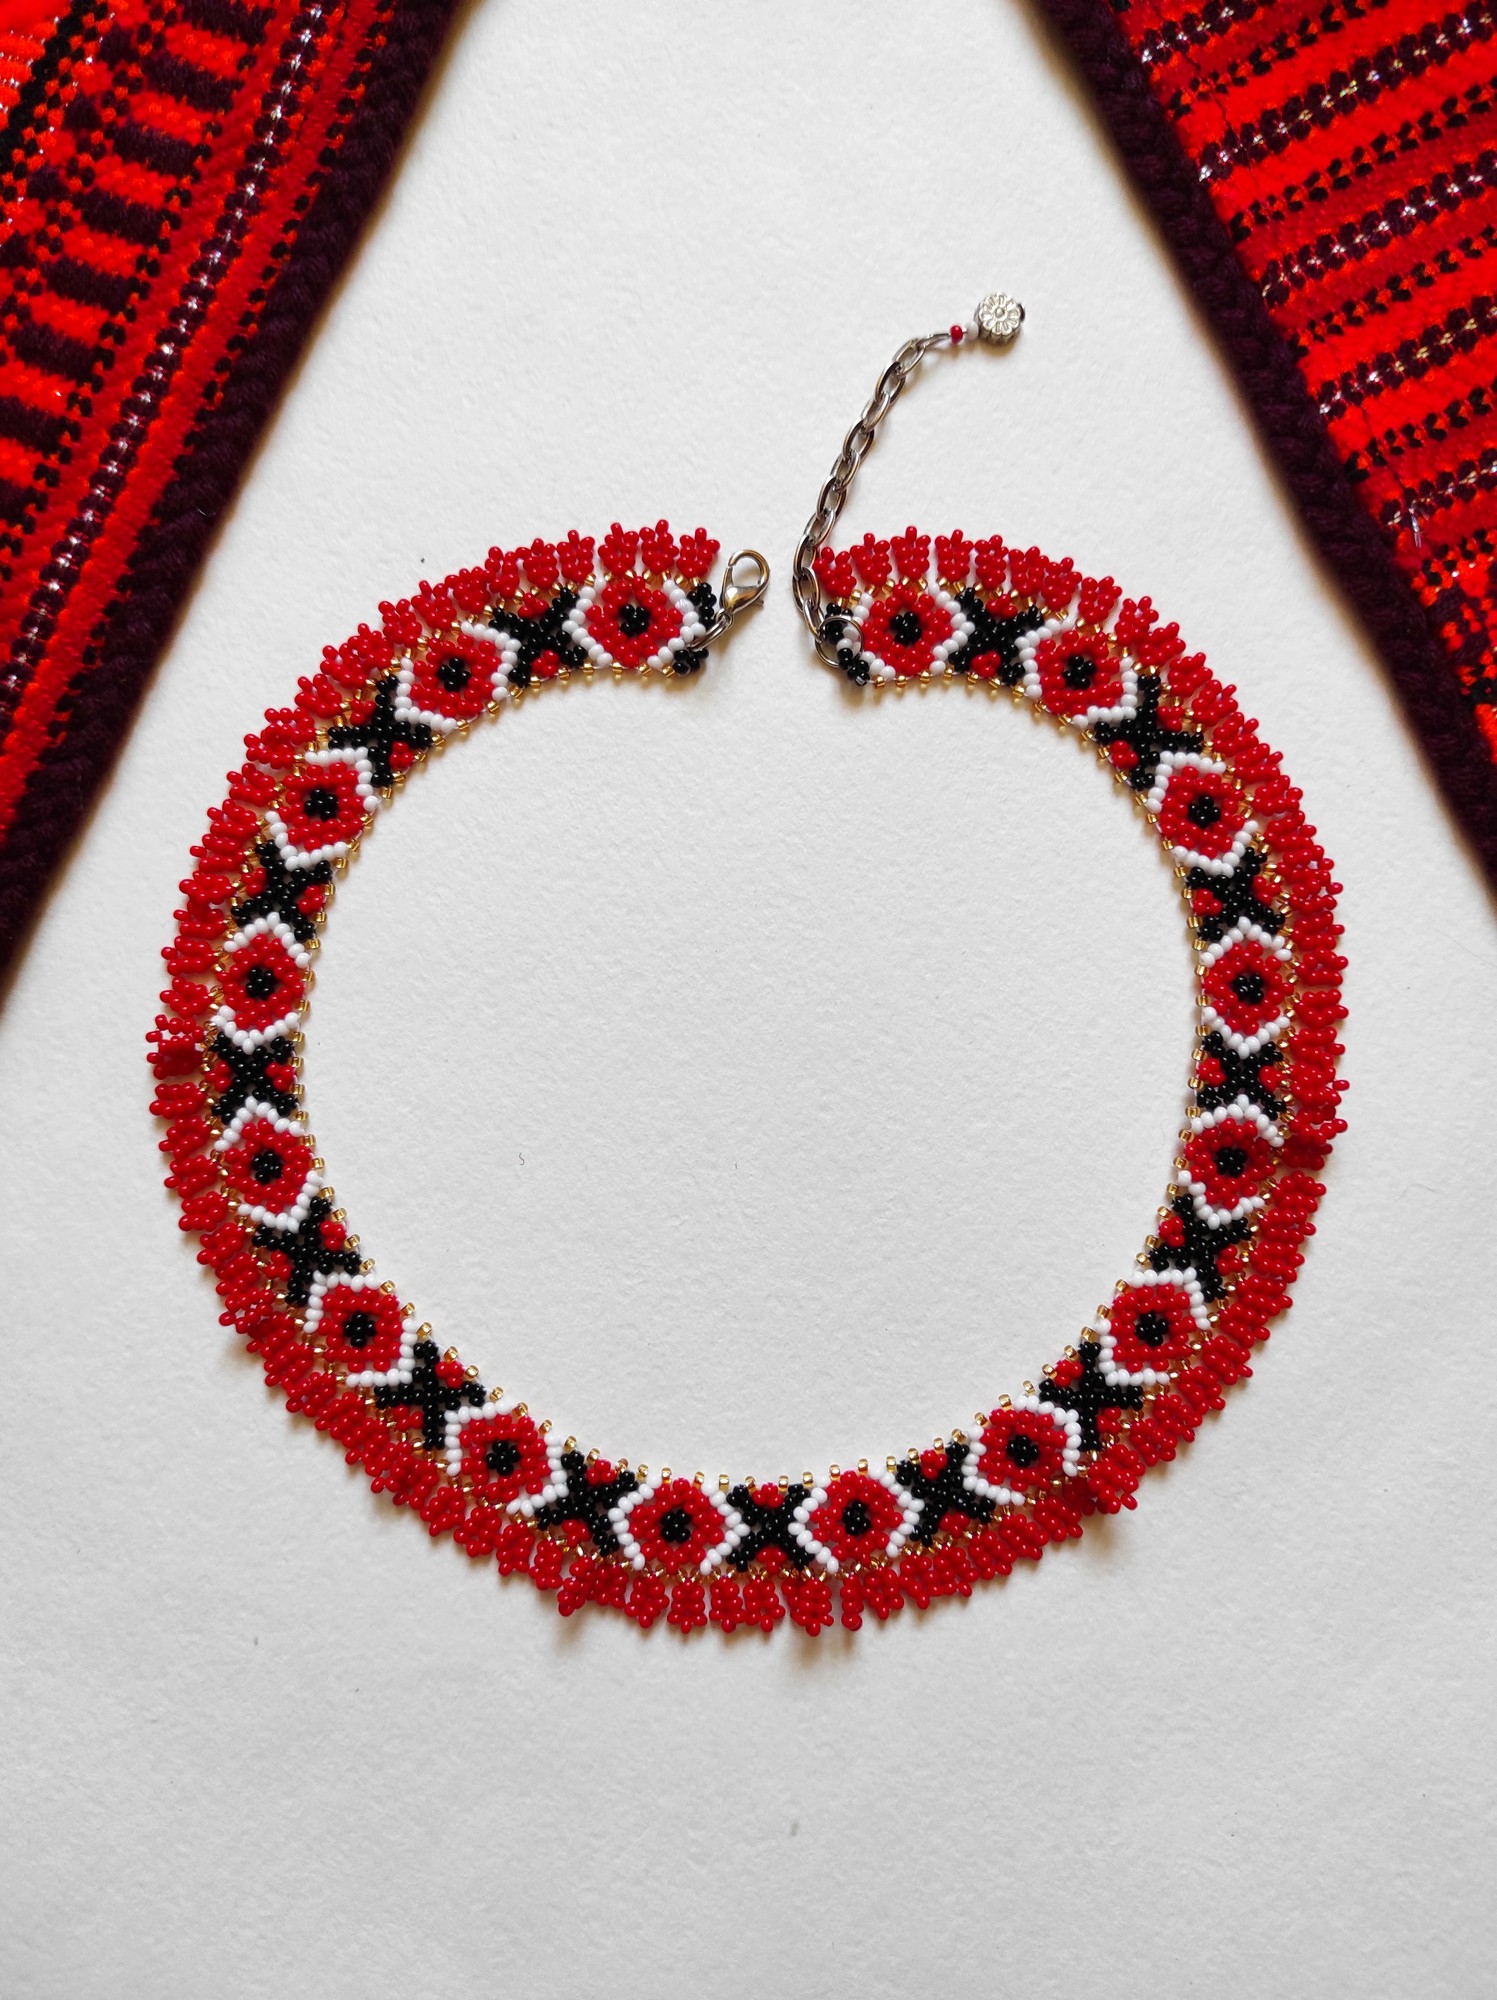 Sylianka "Red and black" from  beads